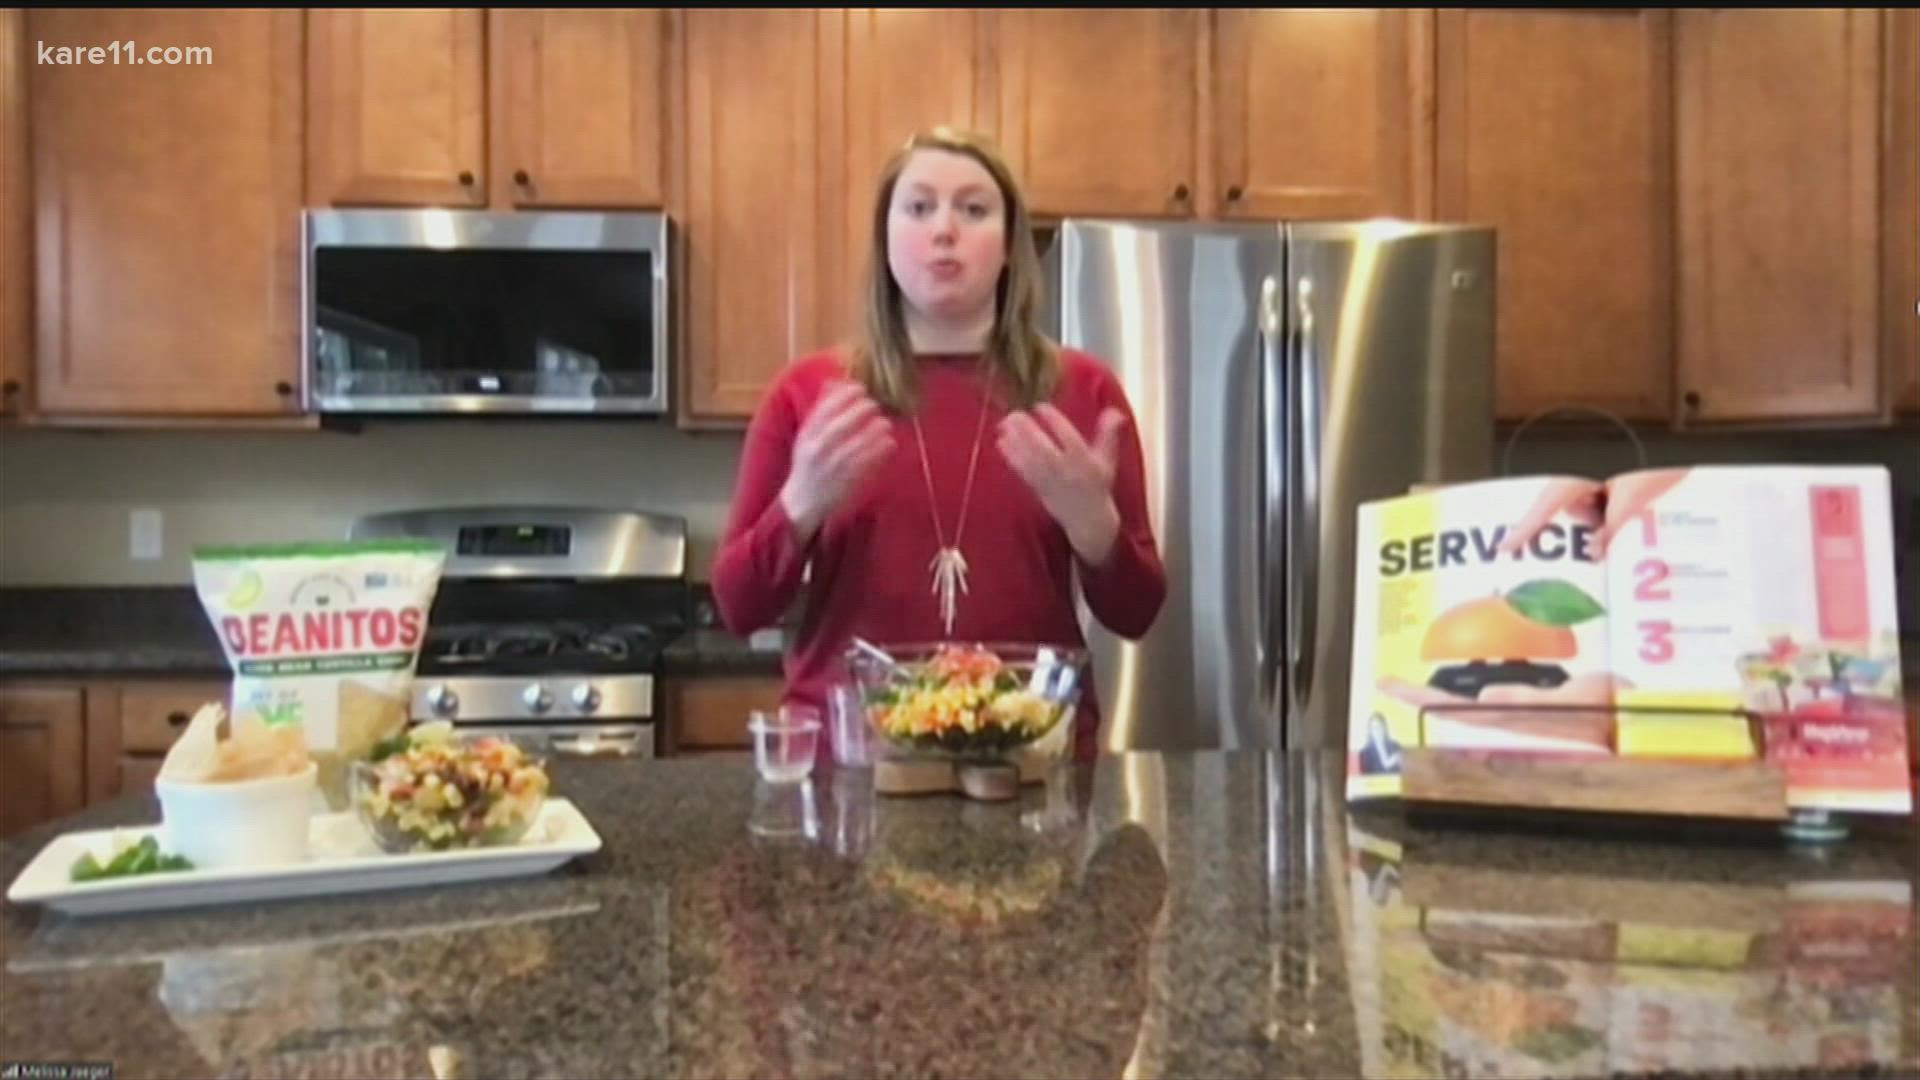 Hy-Vee dietician Melissa Jaeger joined KARE 11 Saturday to discuss heart-healthy recipes, including a mango black bean salsa.